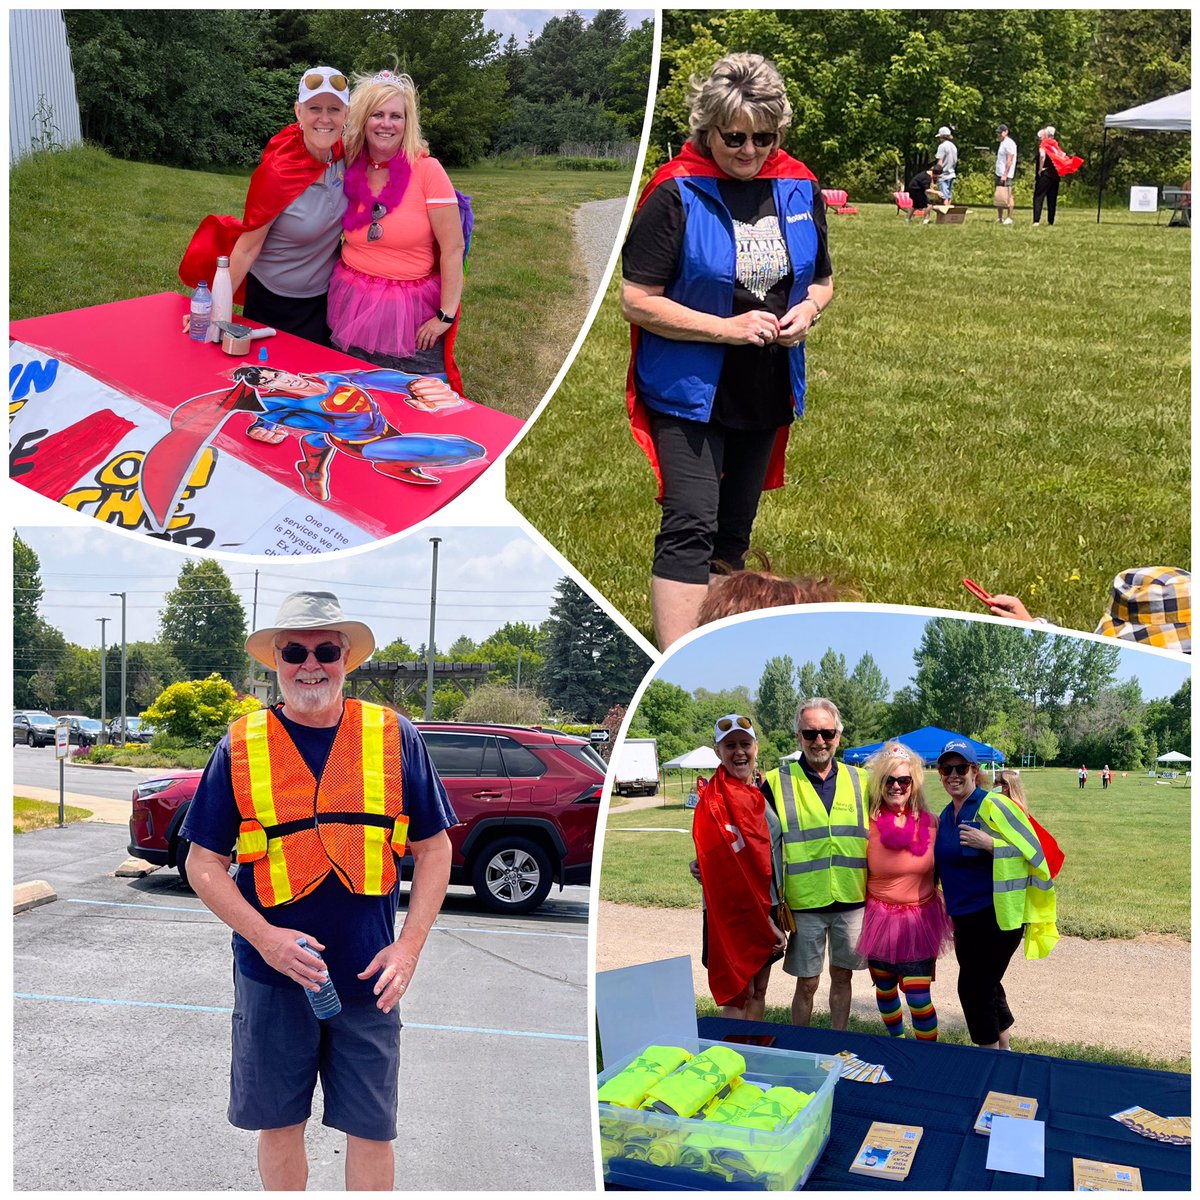 We had s super fantastic day at the super hero super funday for @KidsAbility . So many Rotarians from all the clubs, and many other volunteers- Service Above Self giving back with fun.